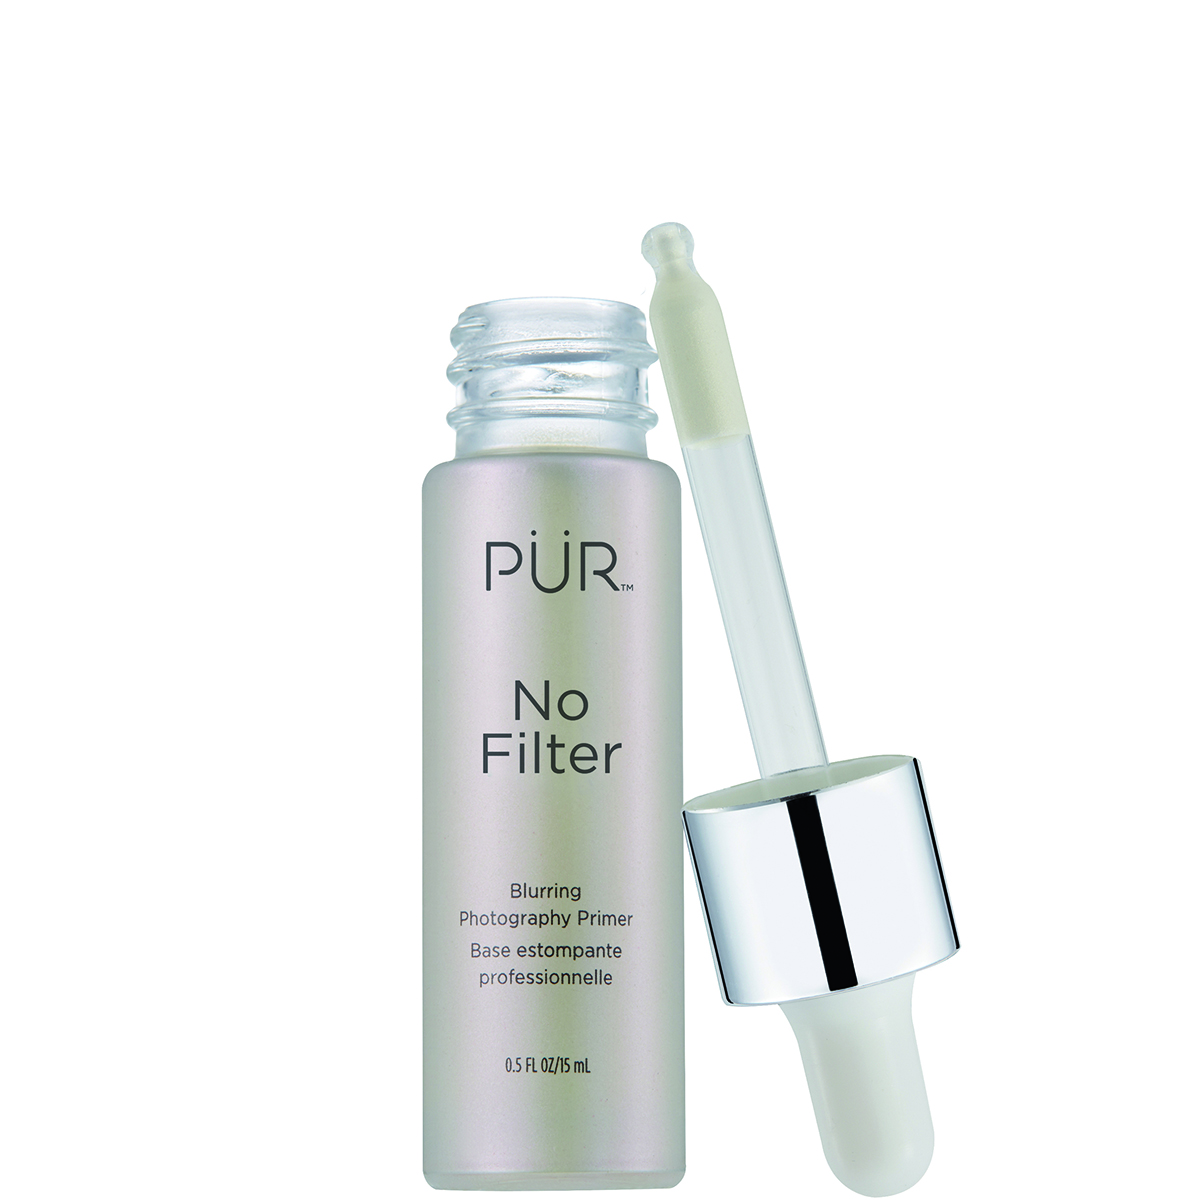 Pur No Filter Blurring Photography Primer